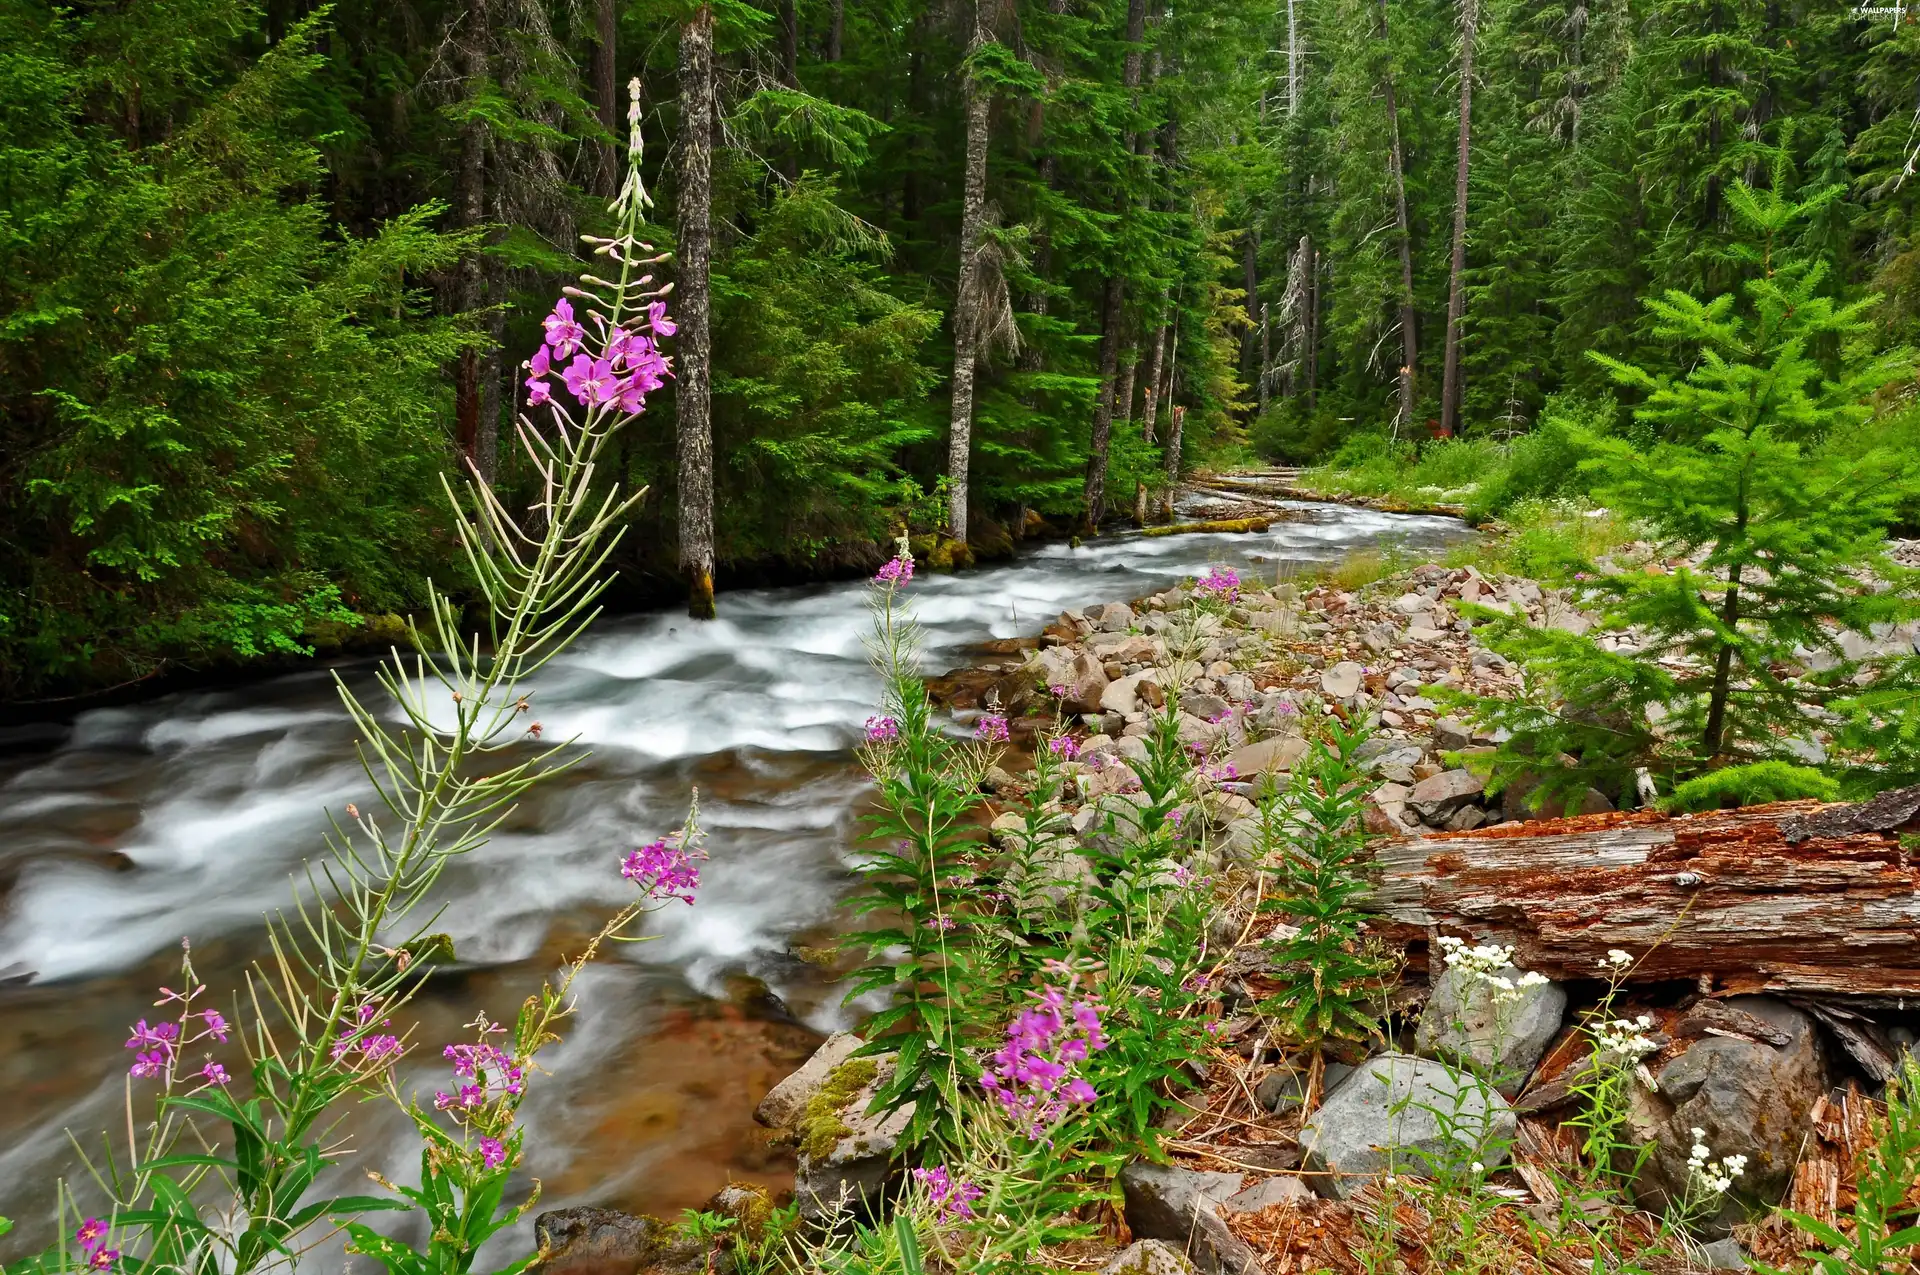 Wildflowers, Flowers, River, Stones, forest